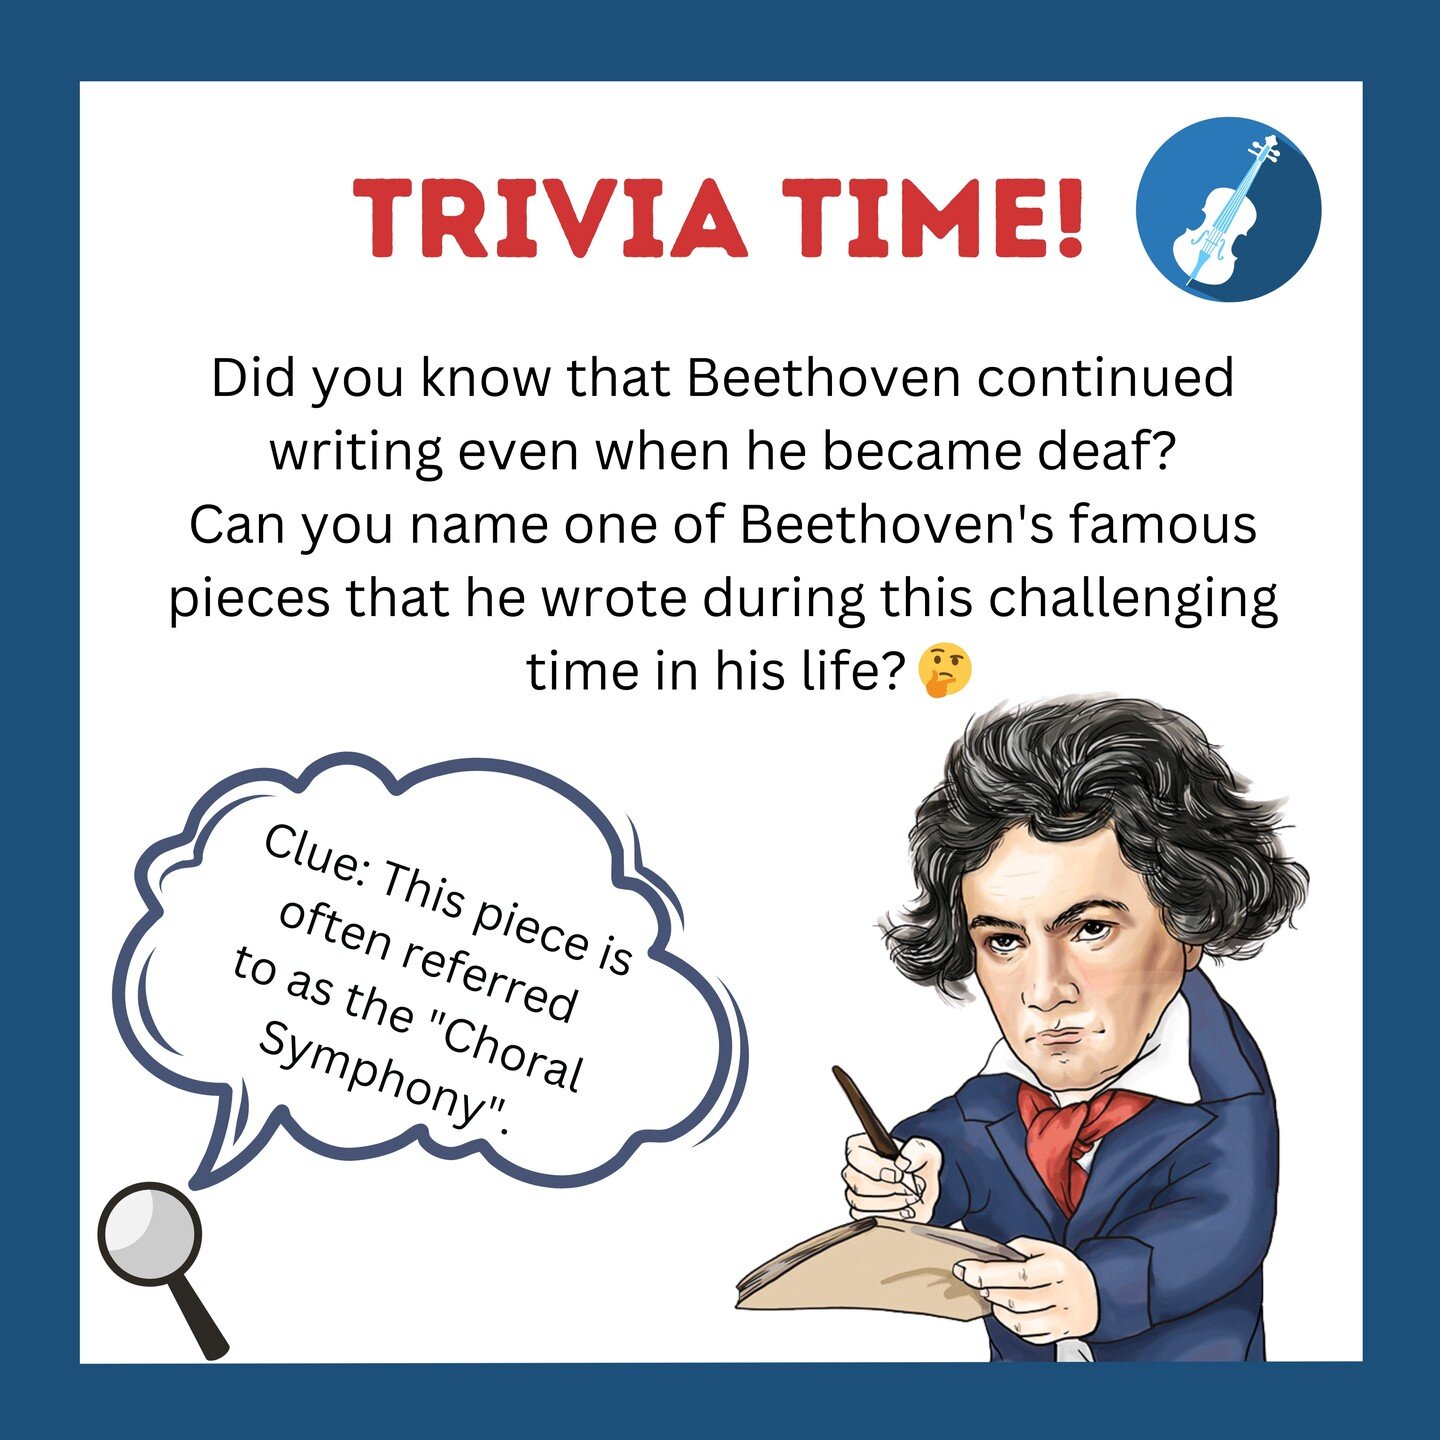 Did you know that Beethoven continued writing even when he became deaf? 

Question: Can you name one of Beethoven's famous pieces that he wrote during this challenging time in his life? 🤔

Clue: This piece is often referred
to as the &quot;Choral Sy